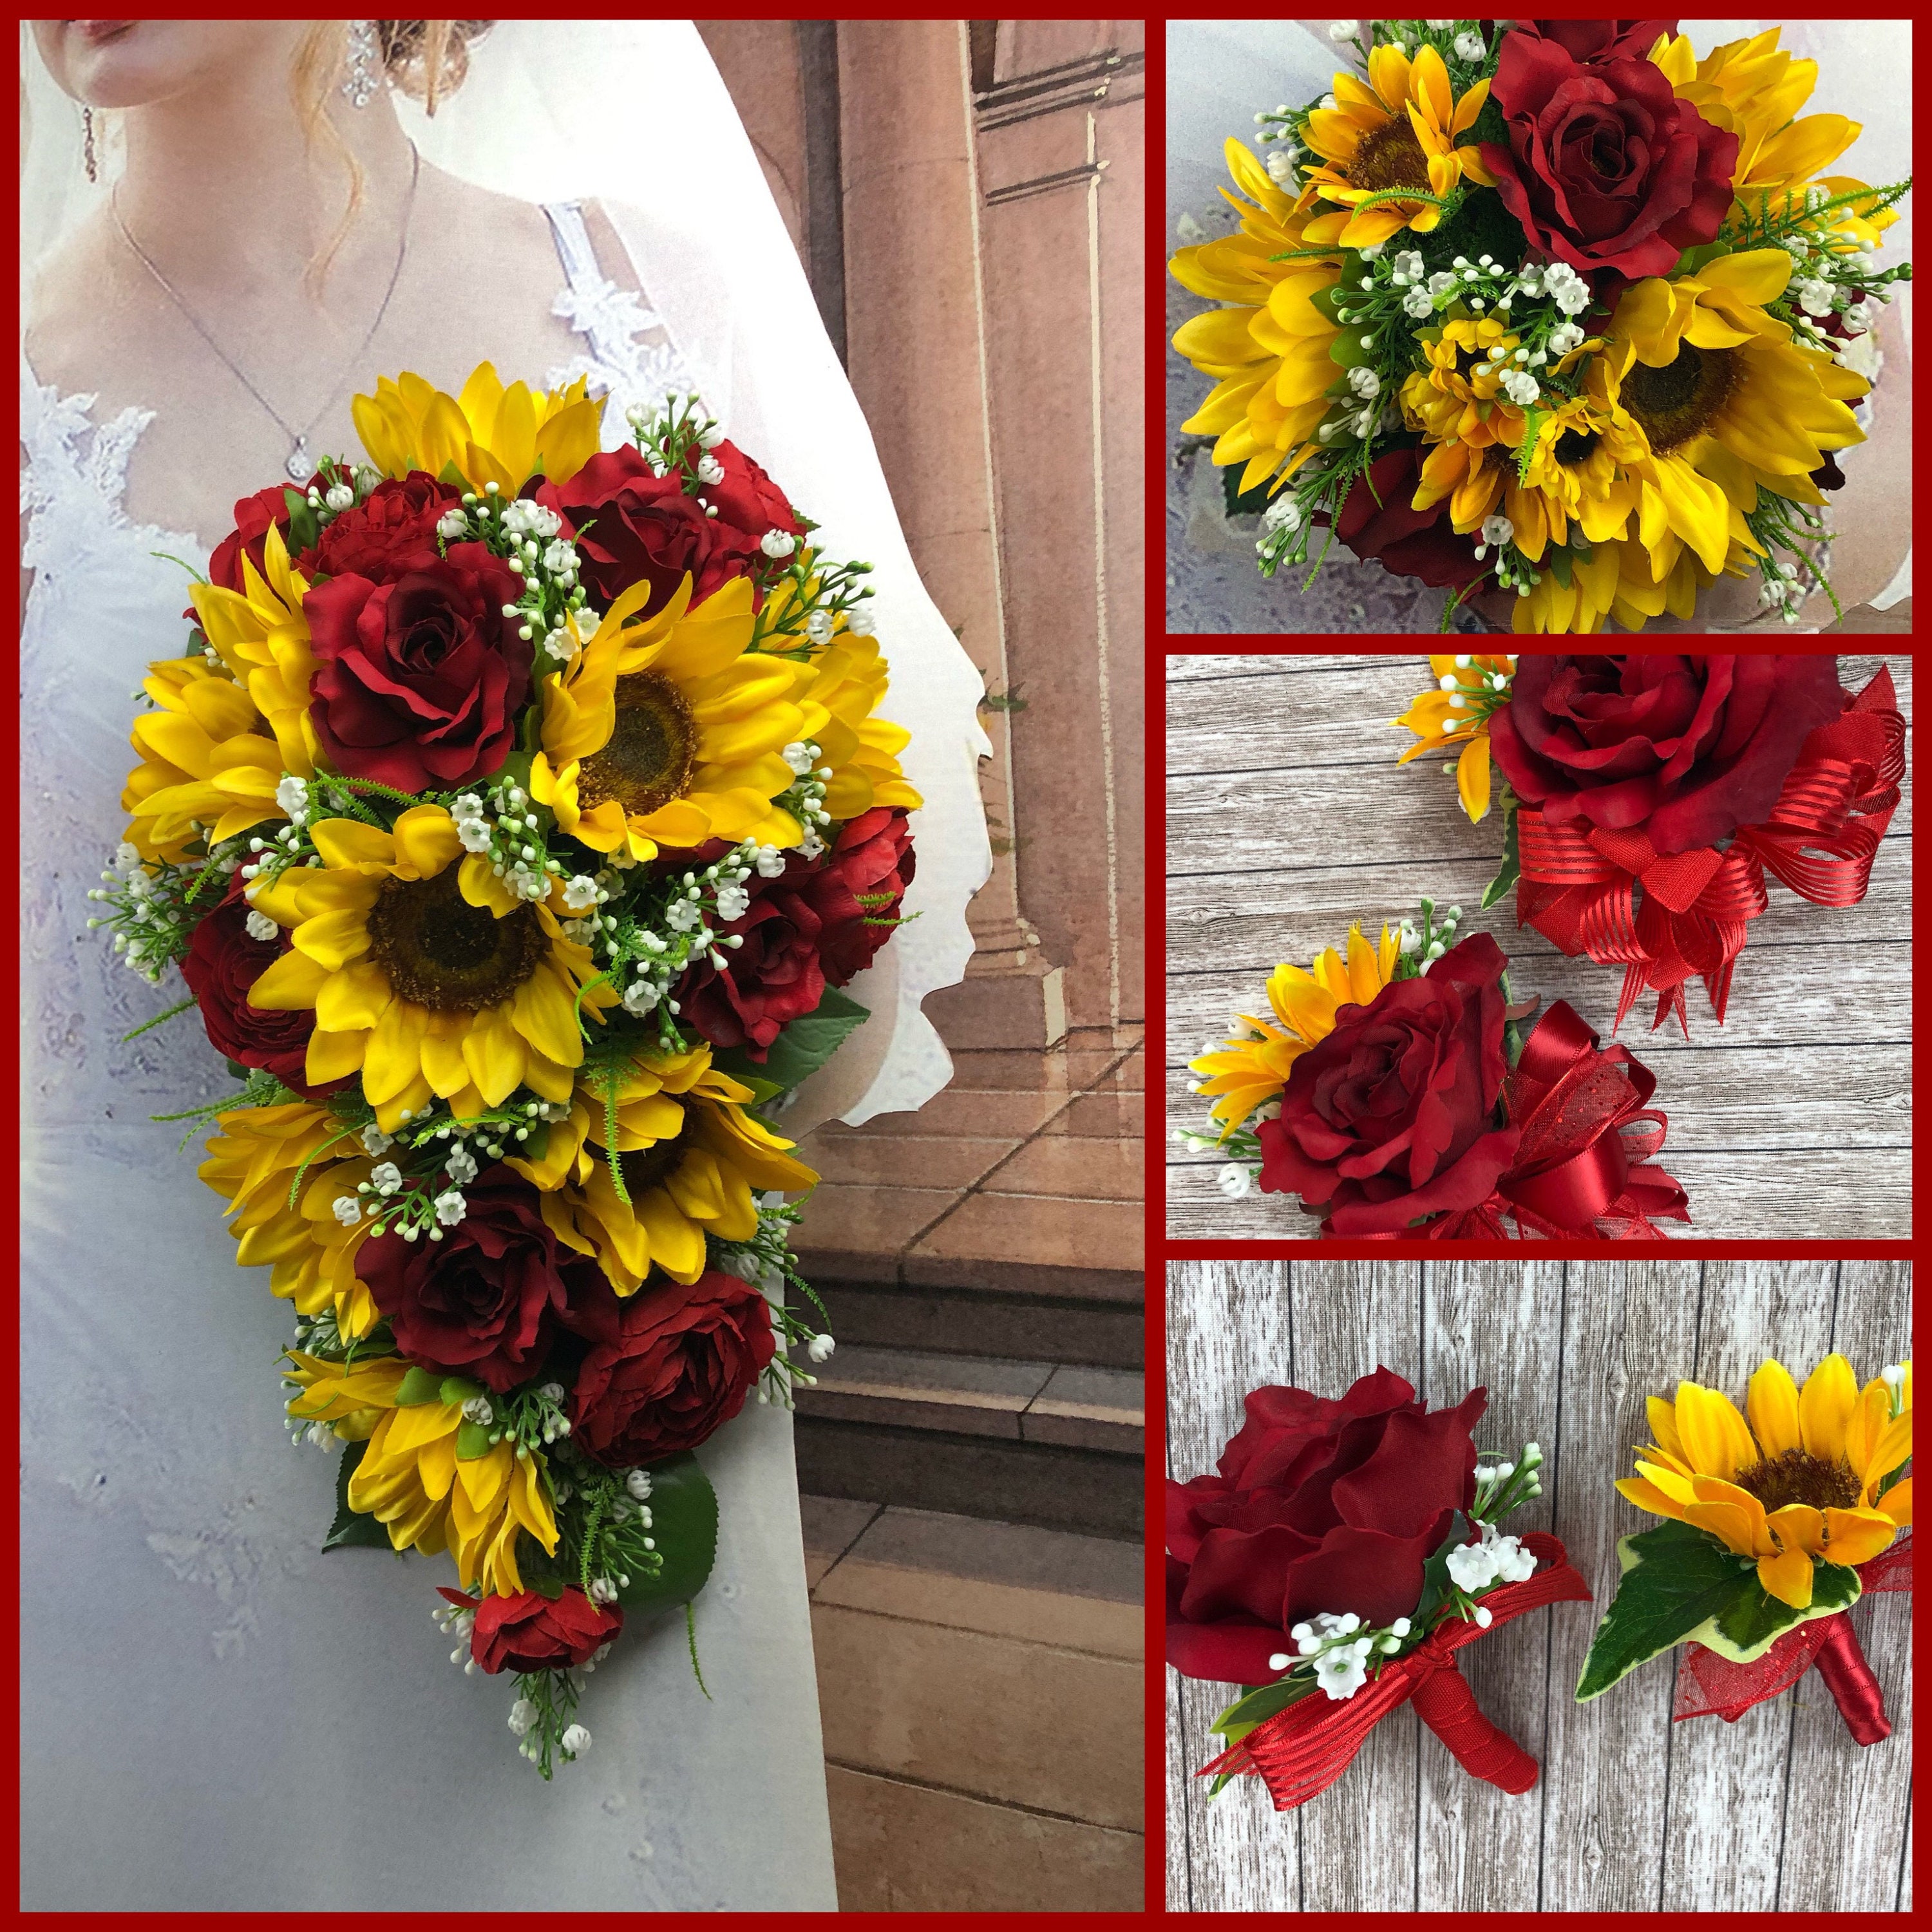 Wedding Flowers Bridal Bouquet decorations Sunflower cranberry red reduced 